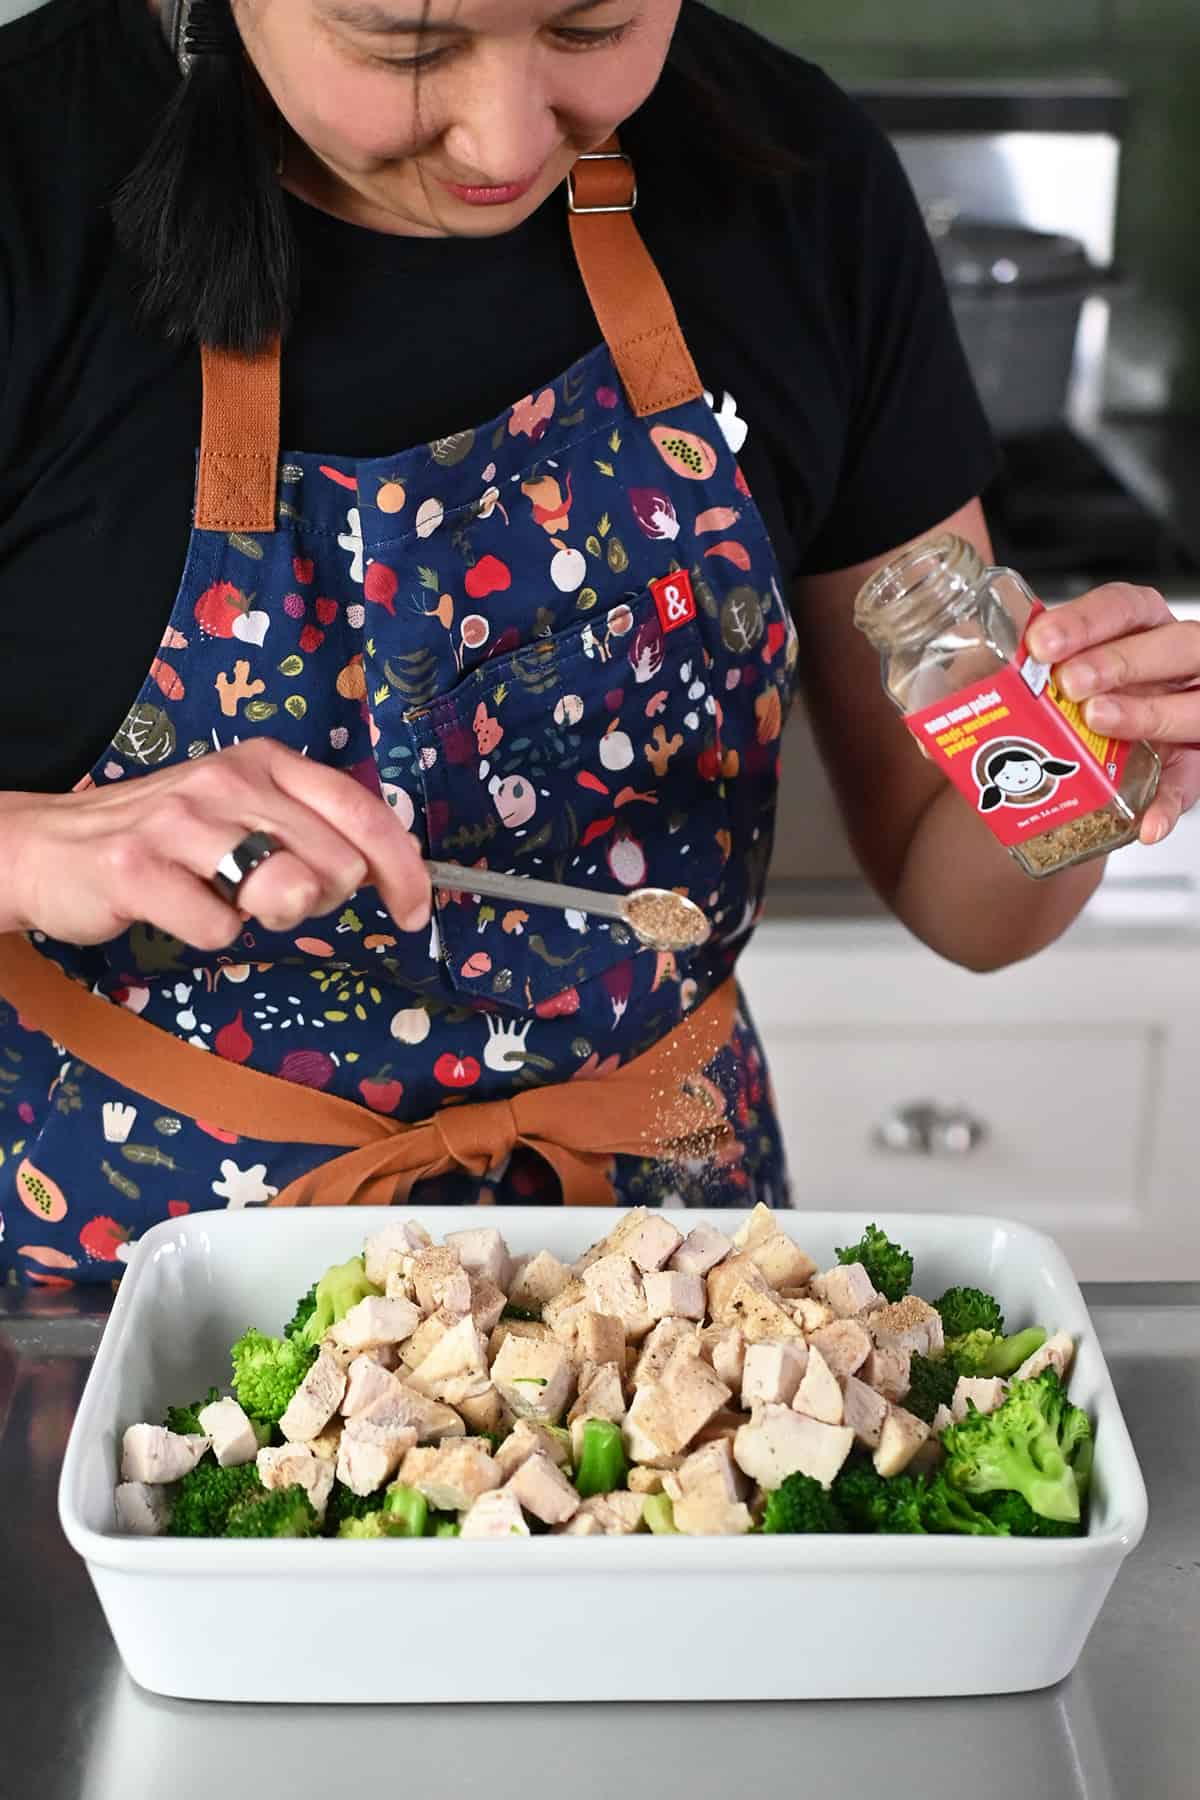 An Asian woman is adding some Nom Nom Paleo's Magic Mushroom Powder to a casserole dish with cooked chicken cubes and broccoli.